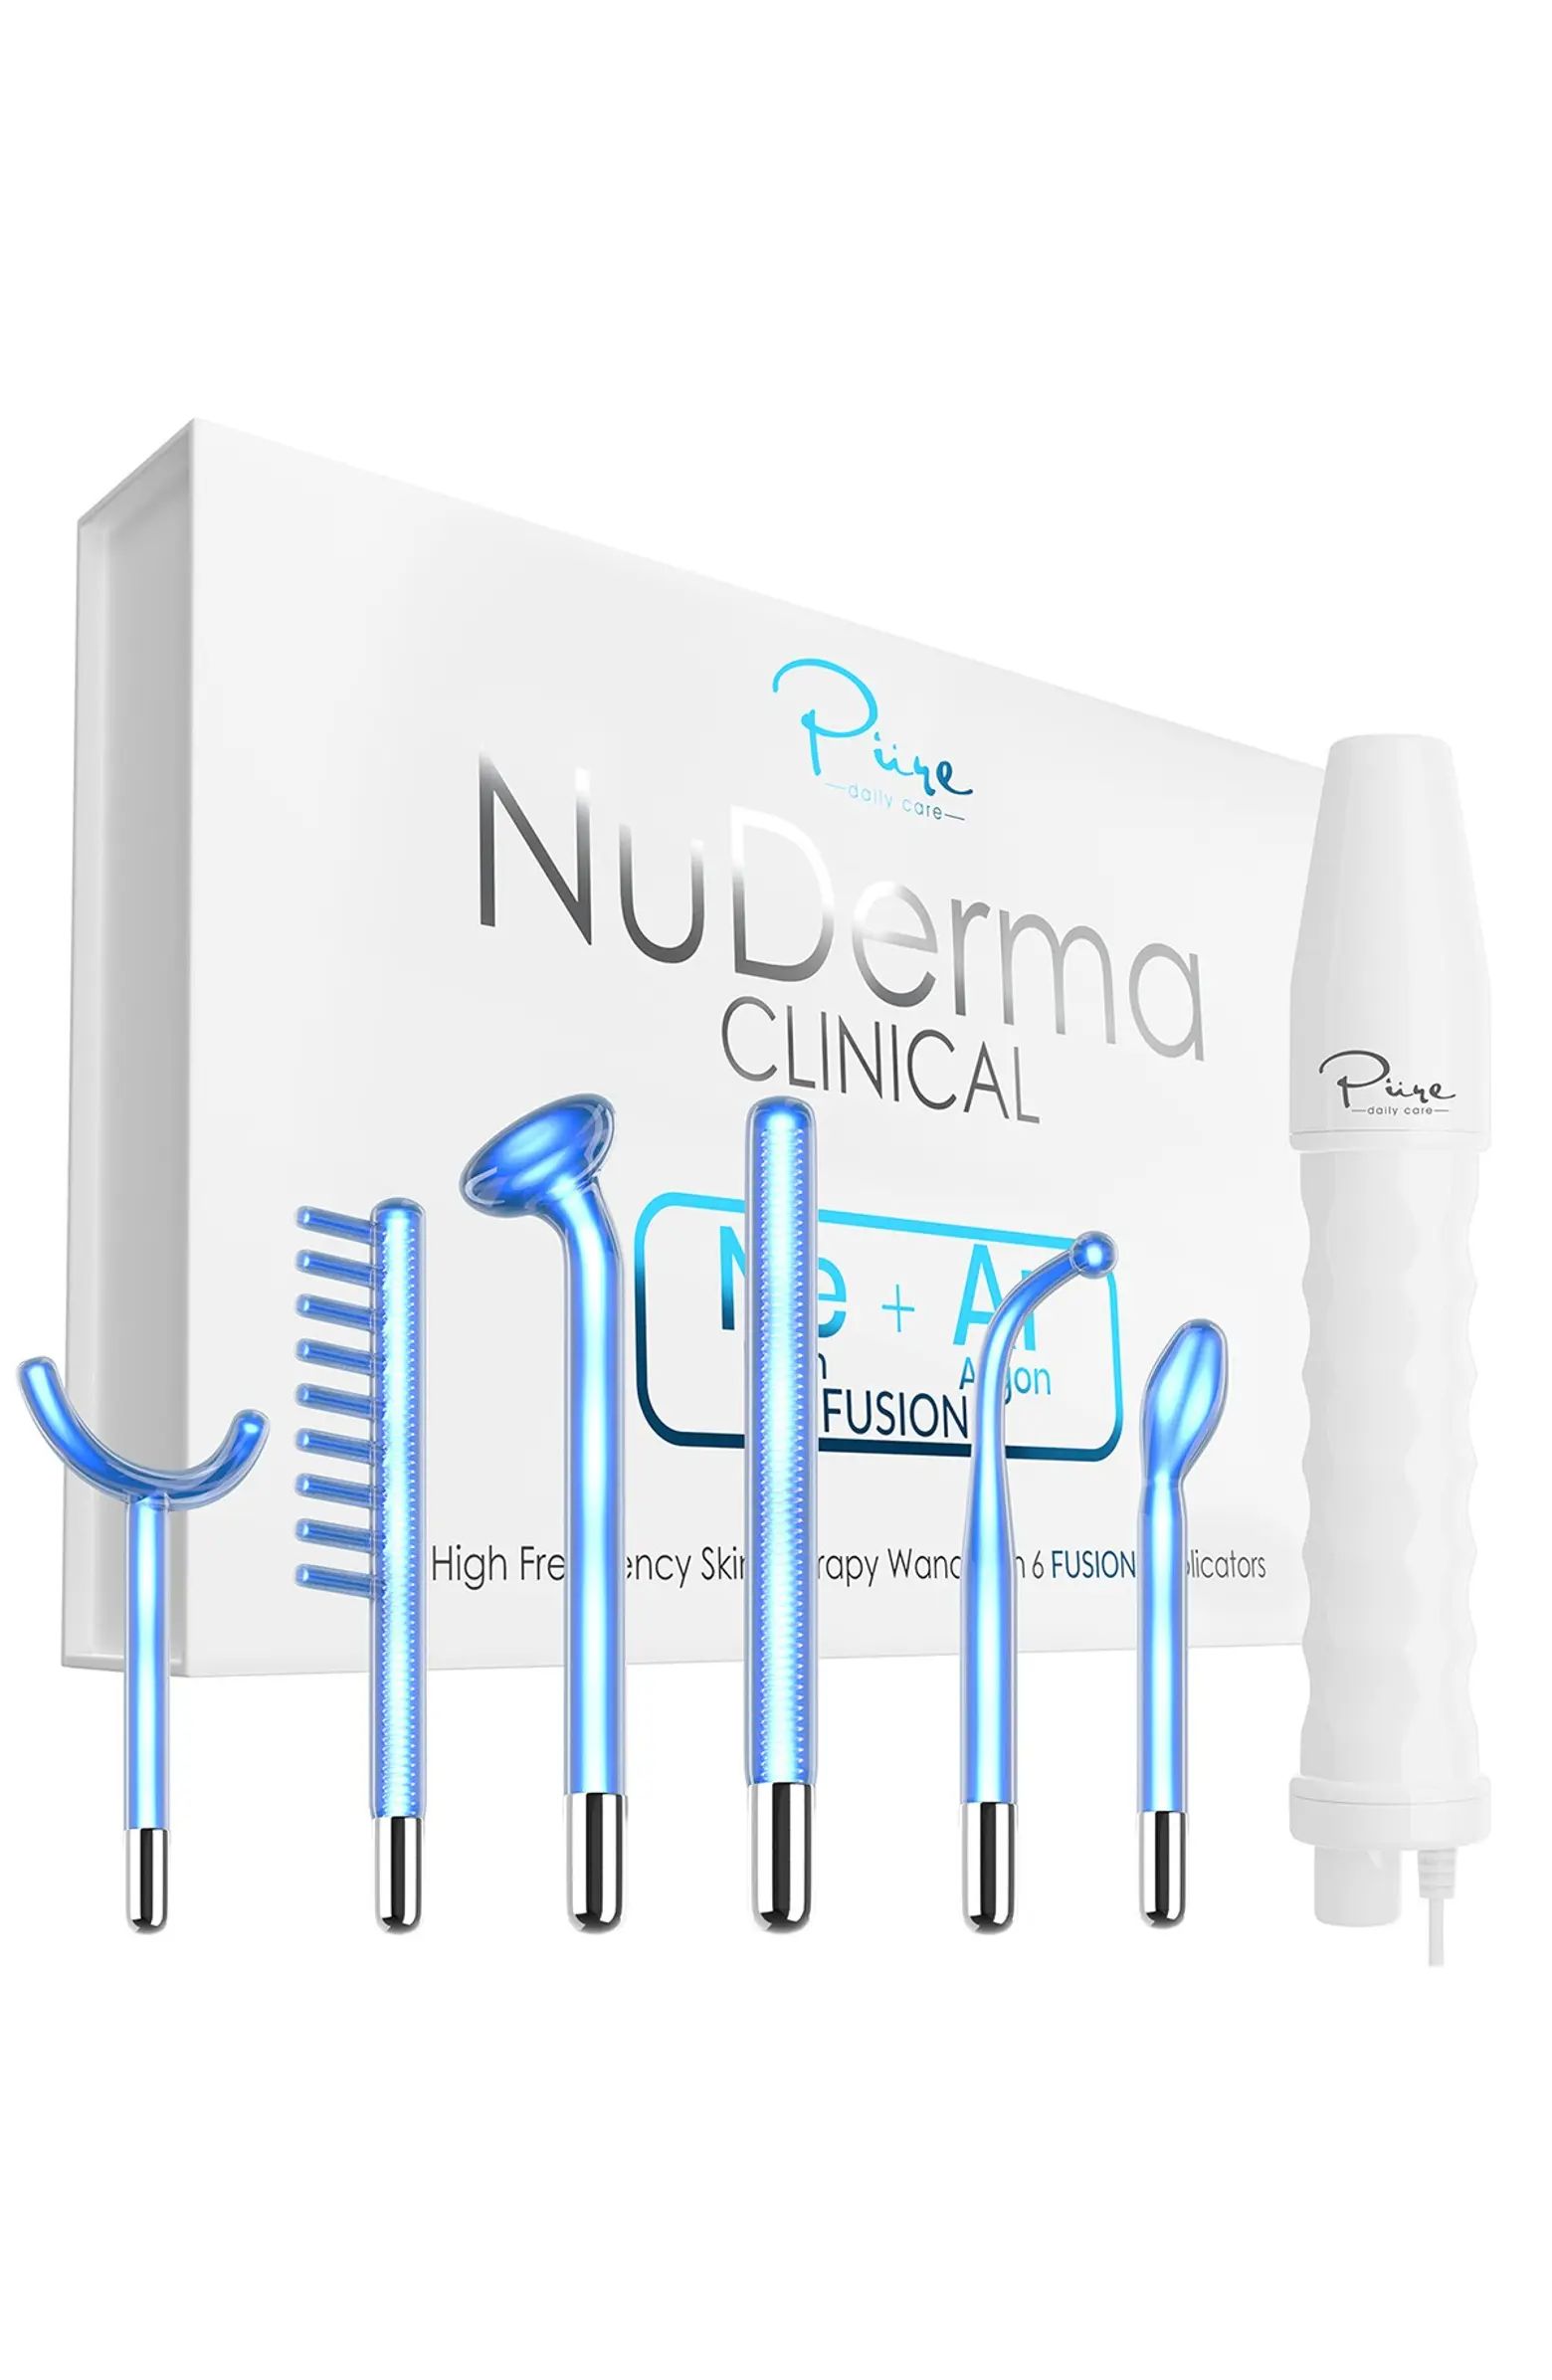 NuDerma Clinical Skin Therapy Wand - Portable Handheld High Frequency Skin Therapy Machine with 6... | Nordstrom Rack